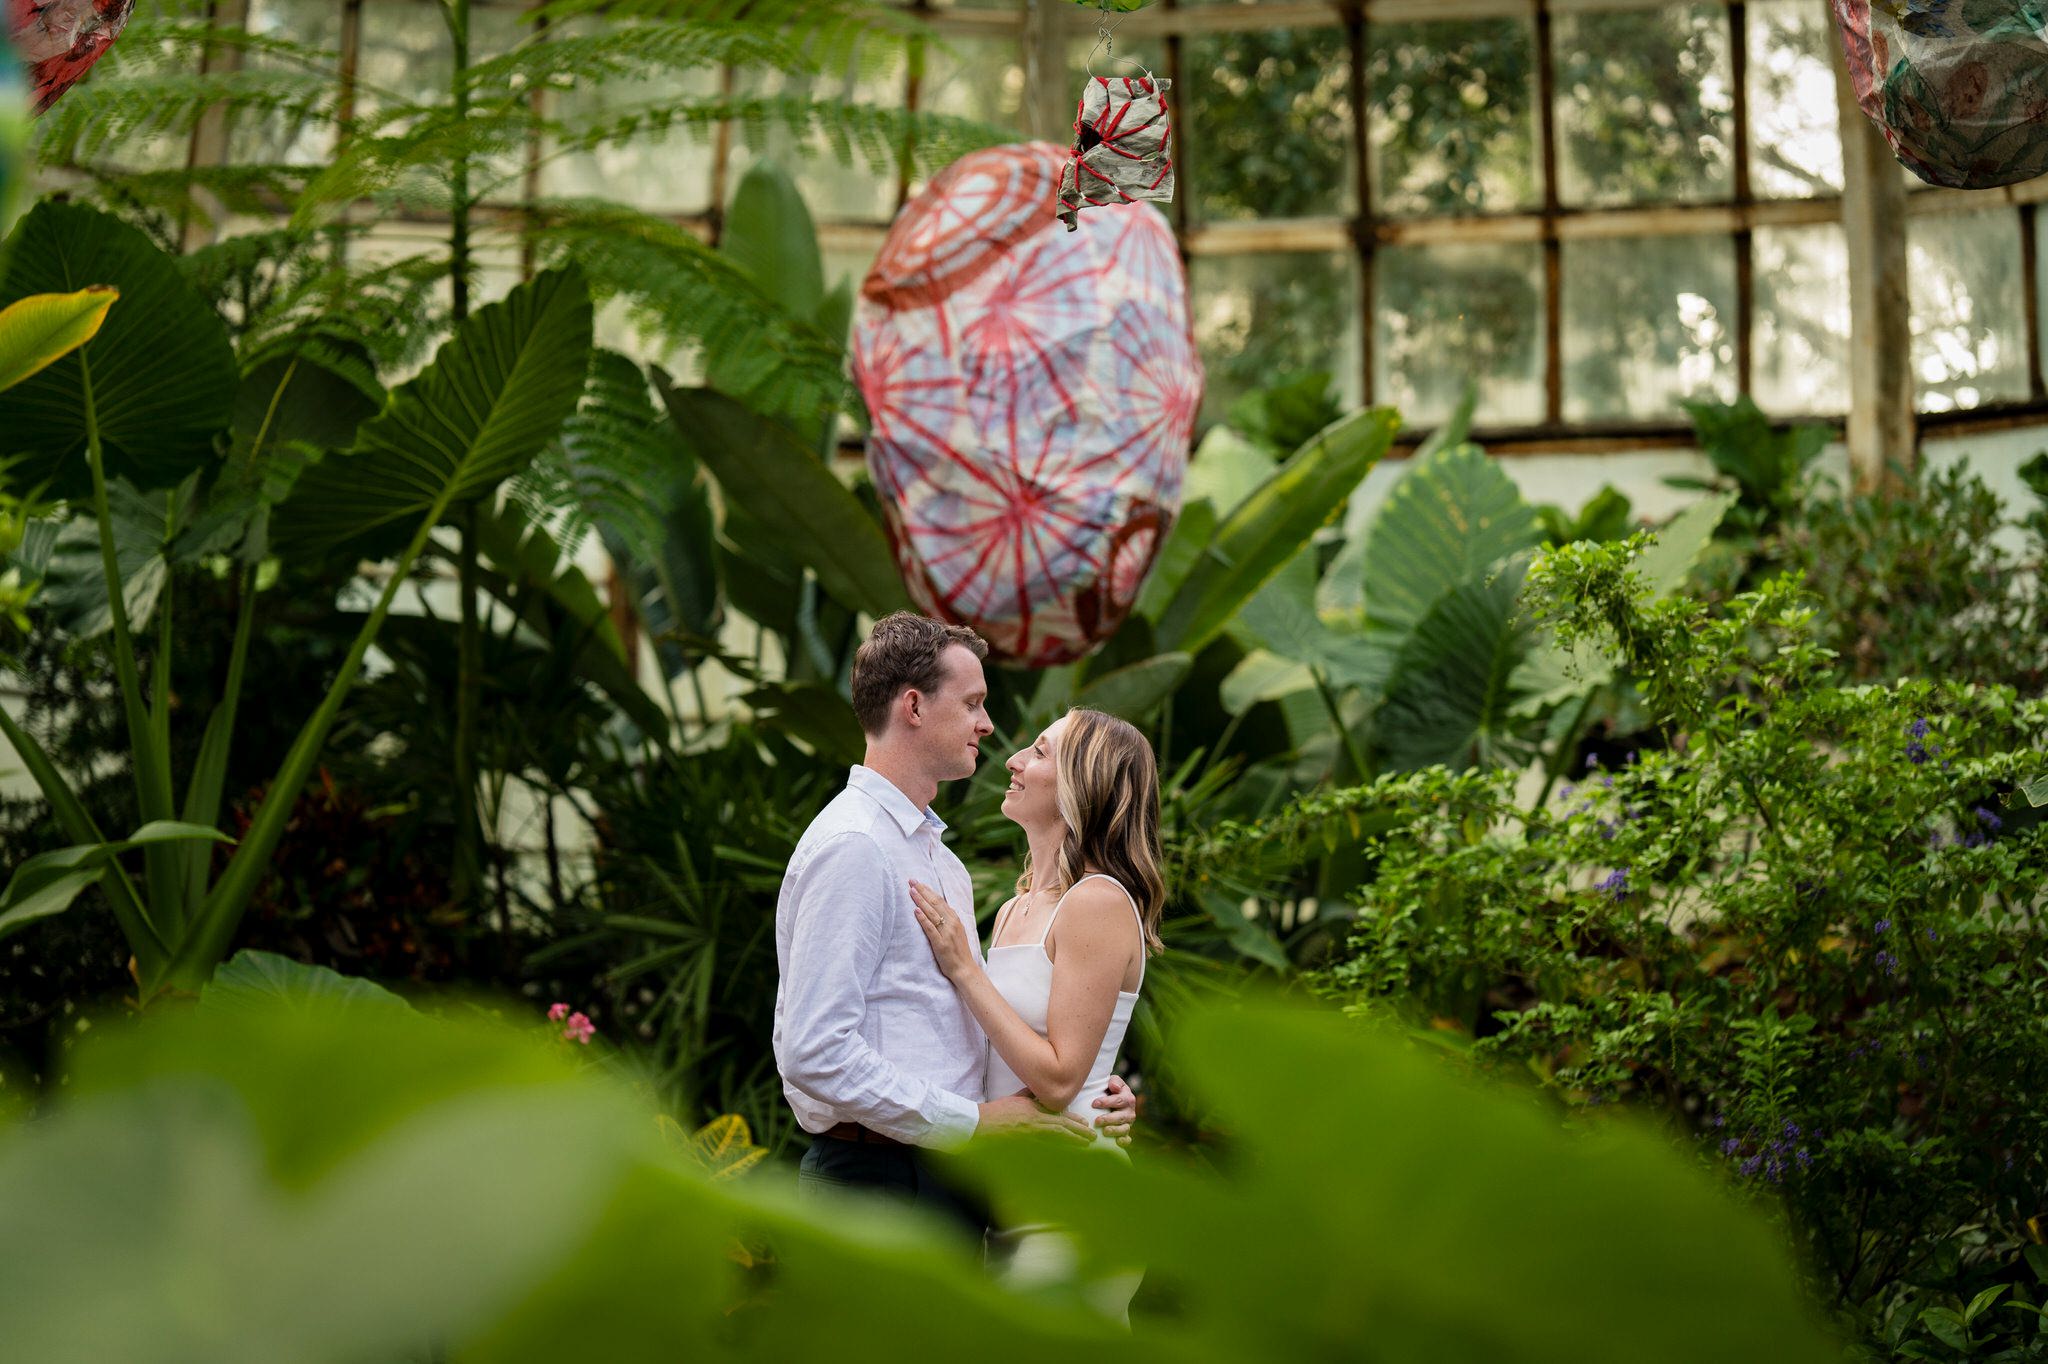 With a big leaf in the foreground, a couples poses during their engagement session at the Lincoln Park Conservatory in Chicago.  